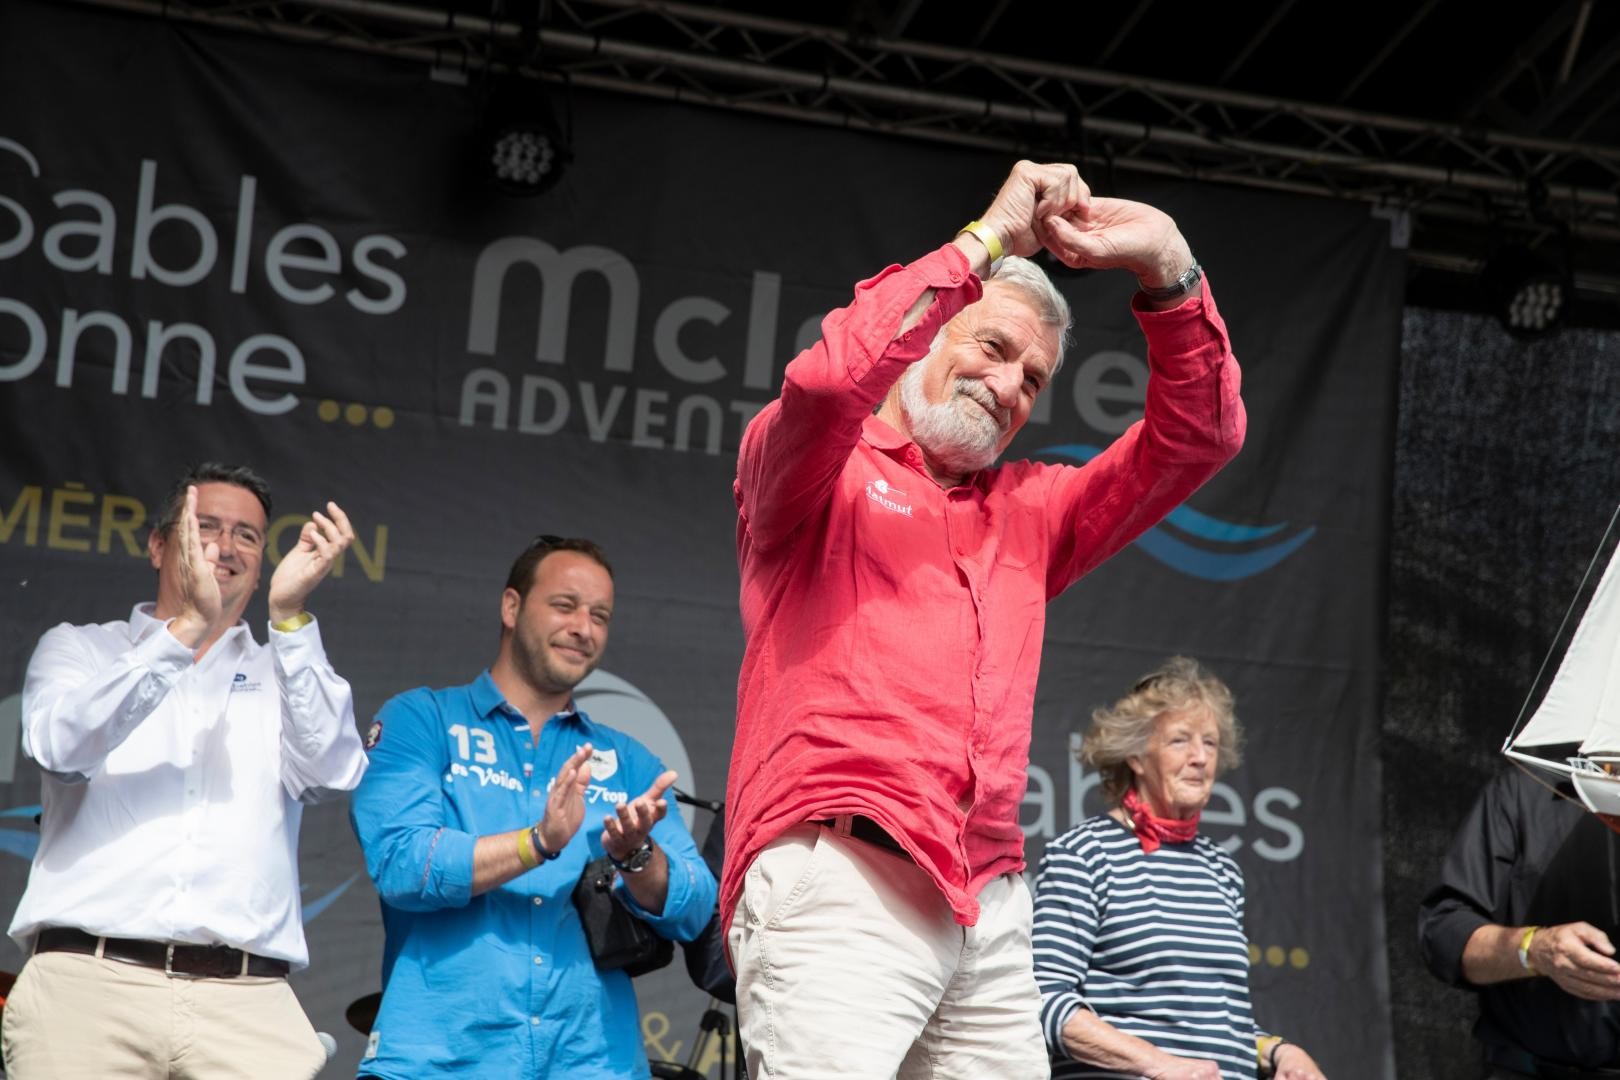 Jean-Luc Van Den Heede enjoying the applause during the GGR prizegiving in Les Sables d'Olonne today